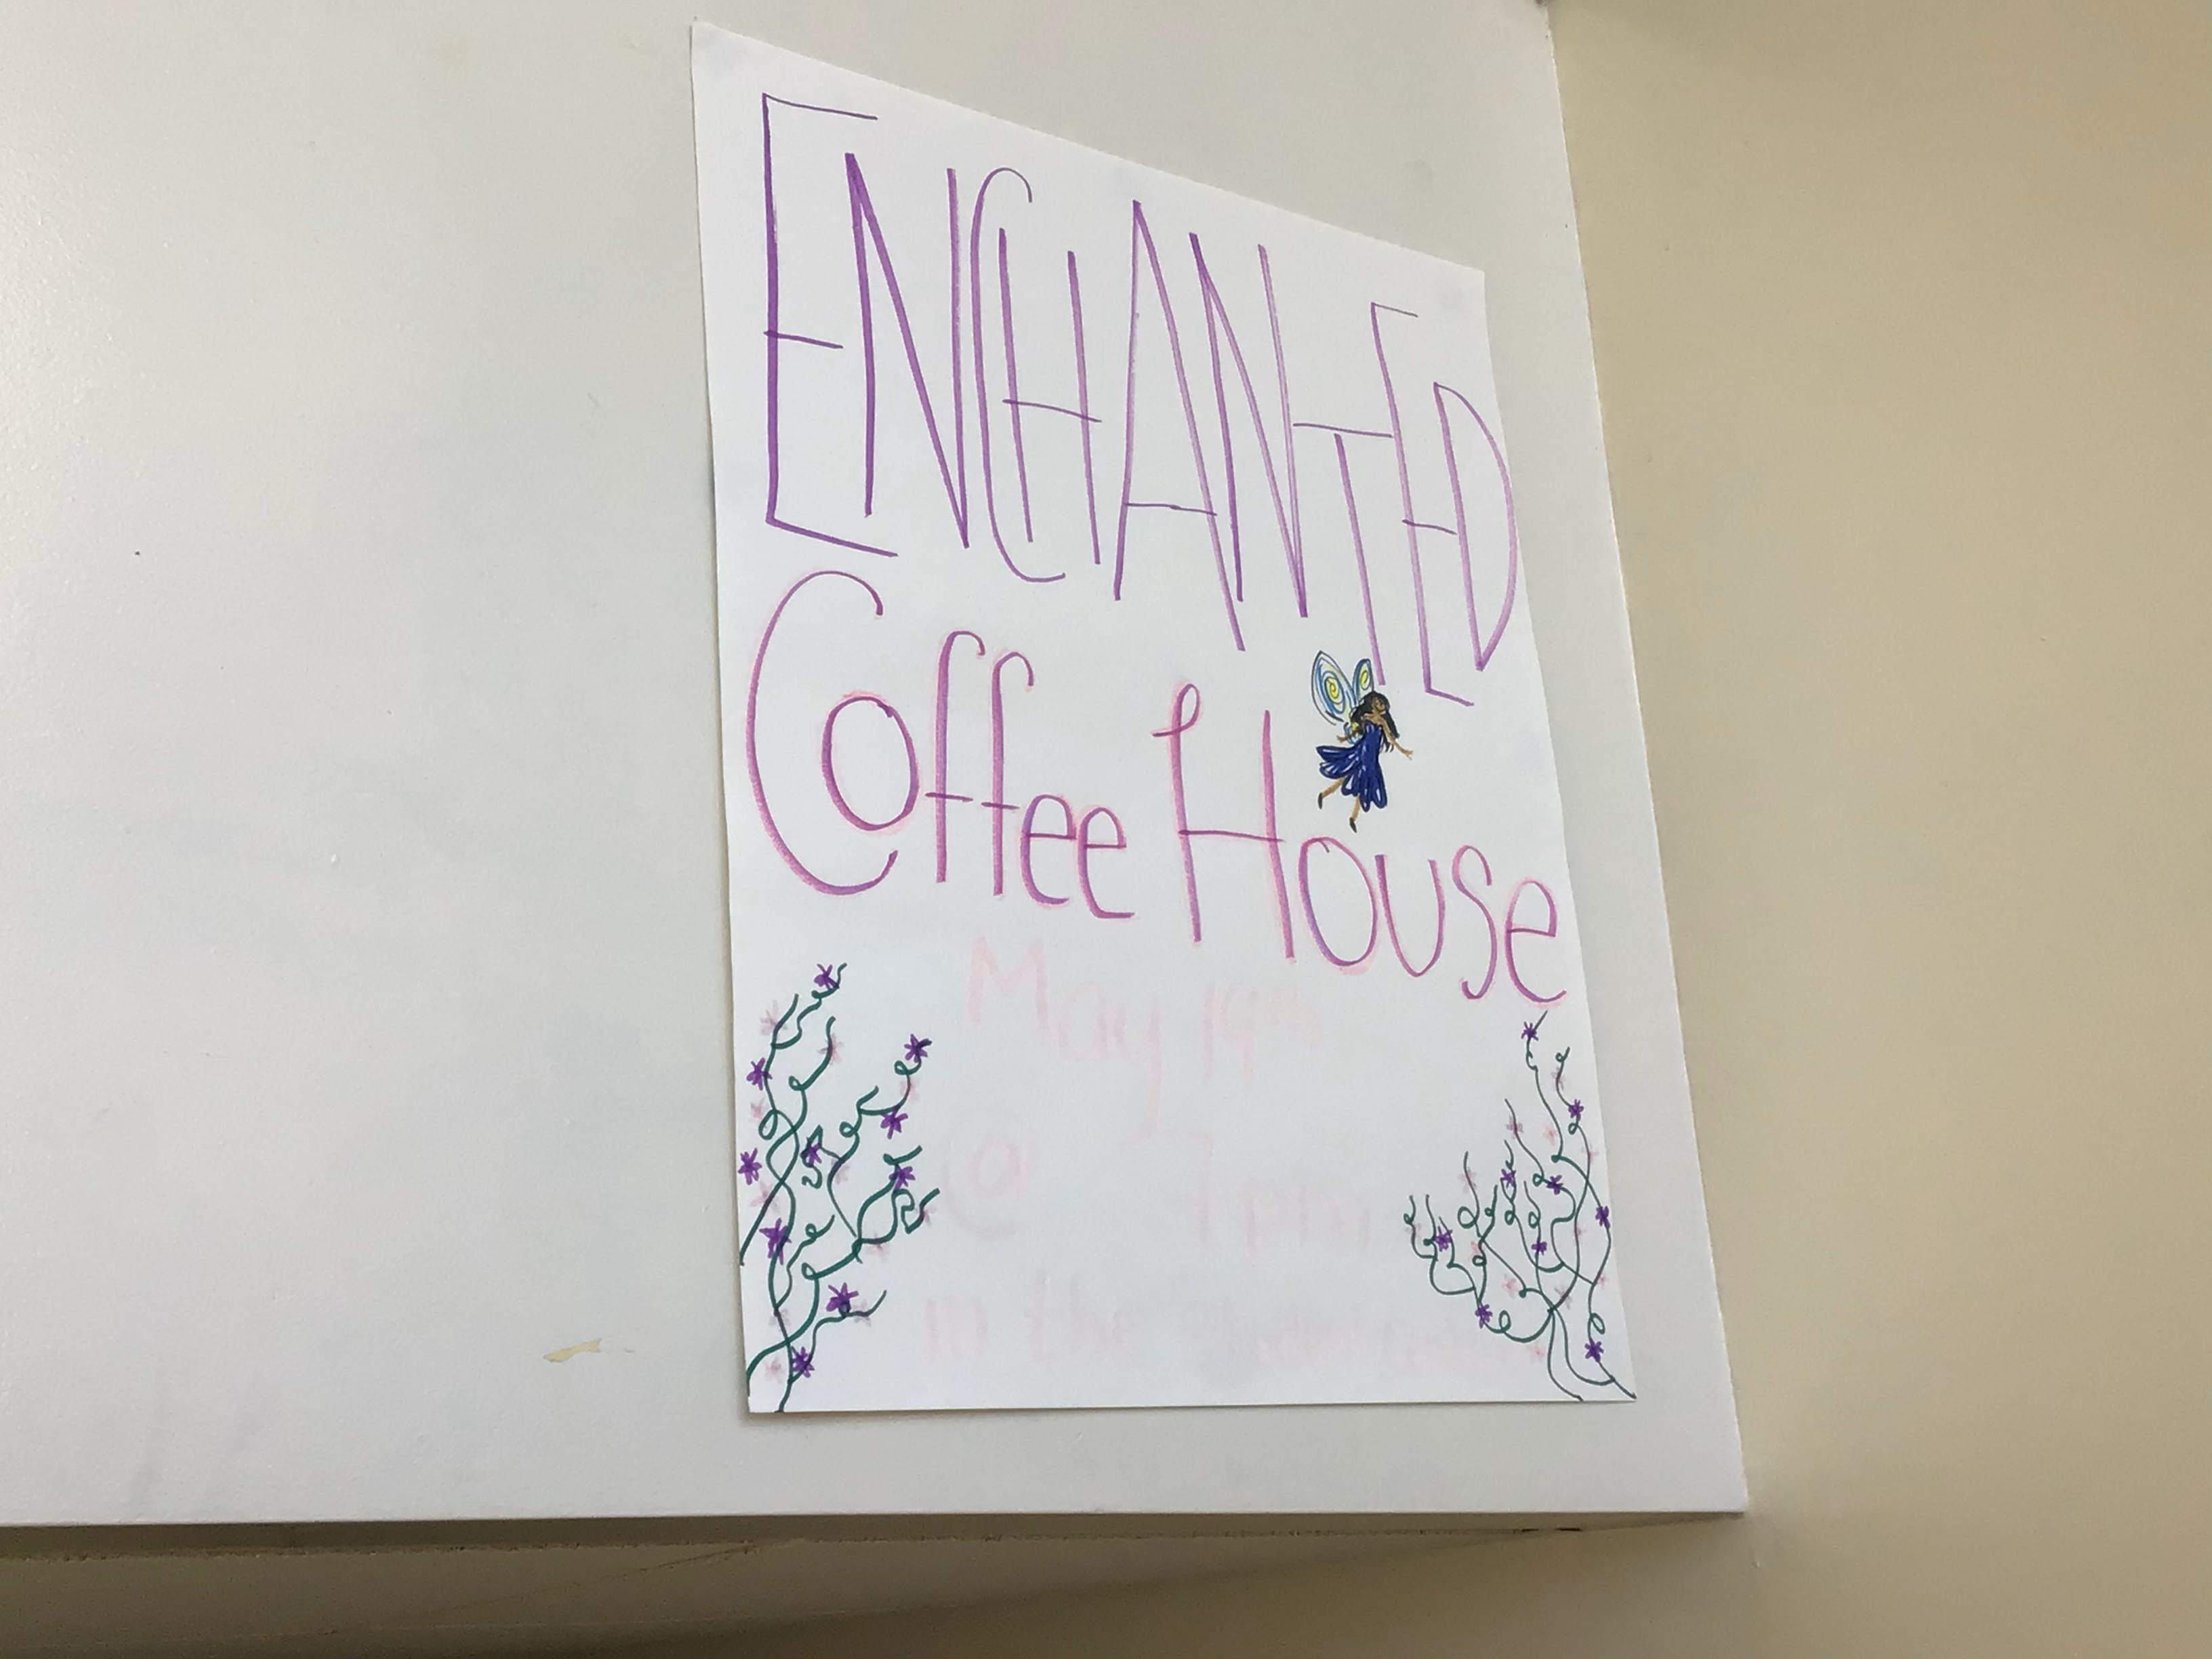 A poster advertising the May Coffeehouse.